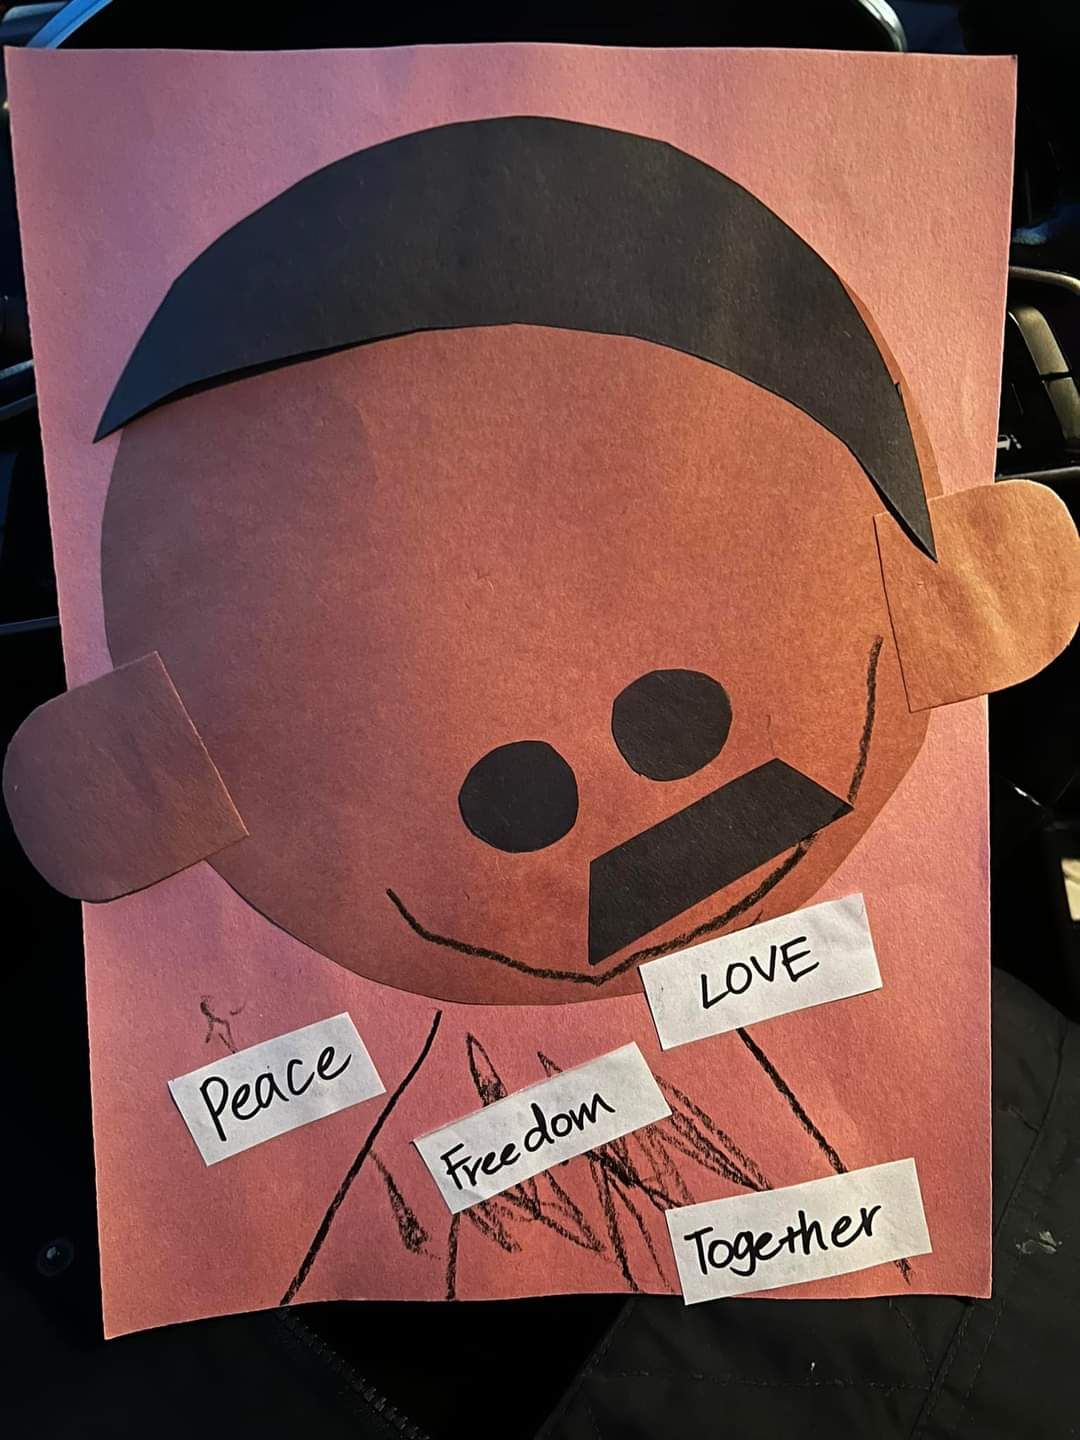 My friend's daughter made this for MLK day